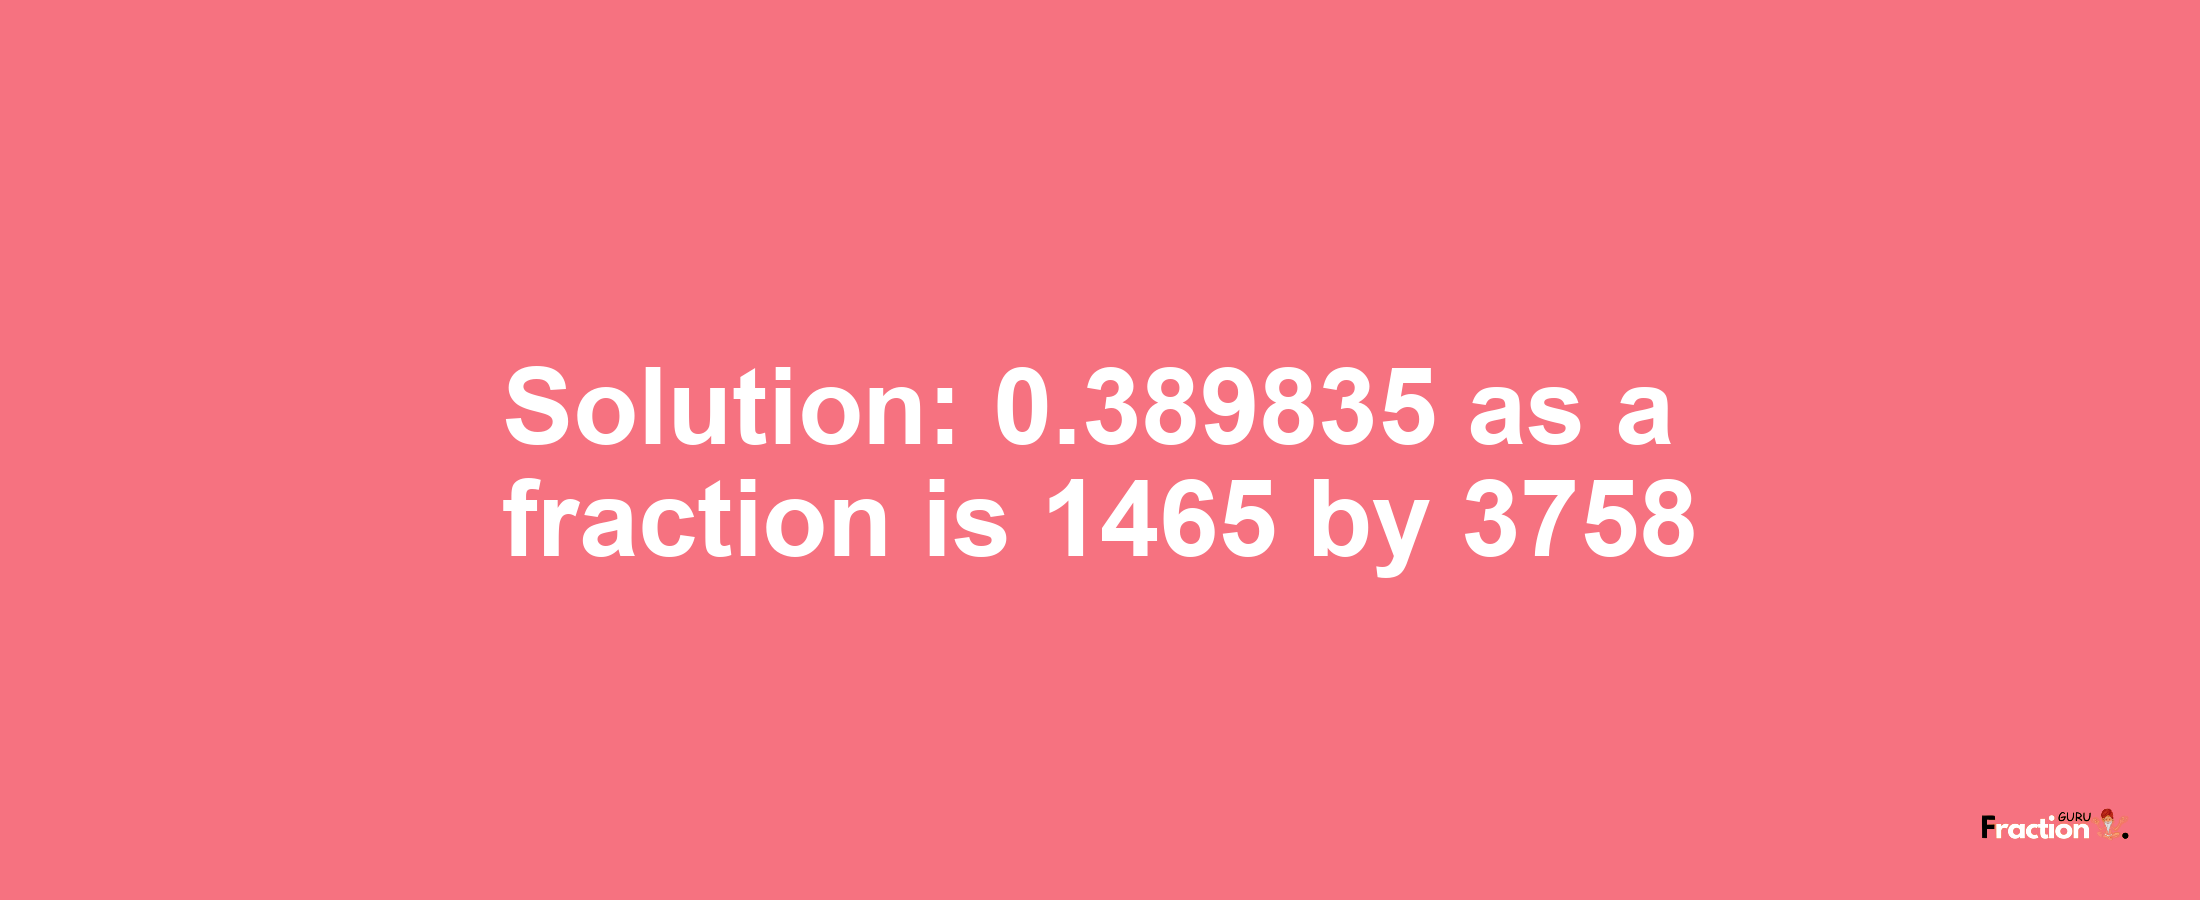 Solution:0.389835 as a fraction is 1465/3758